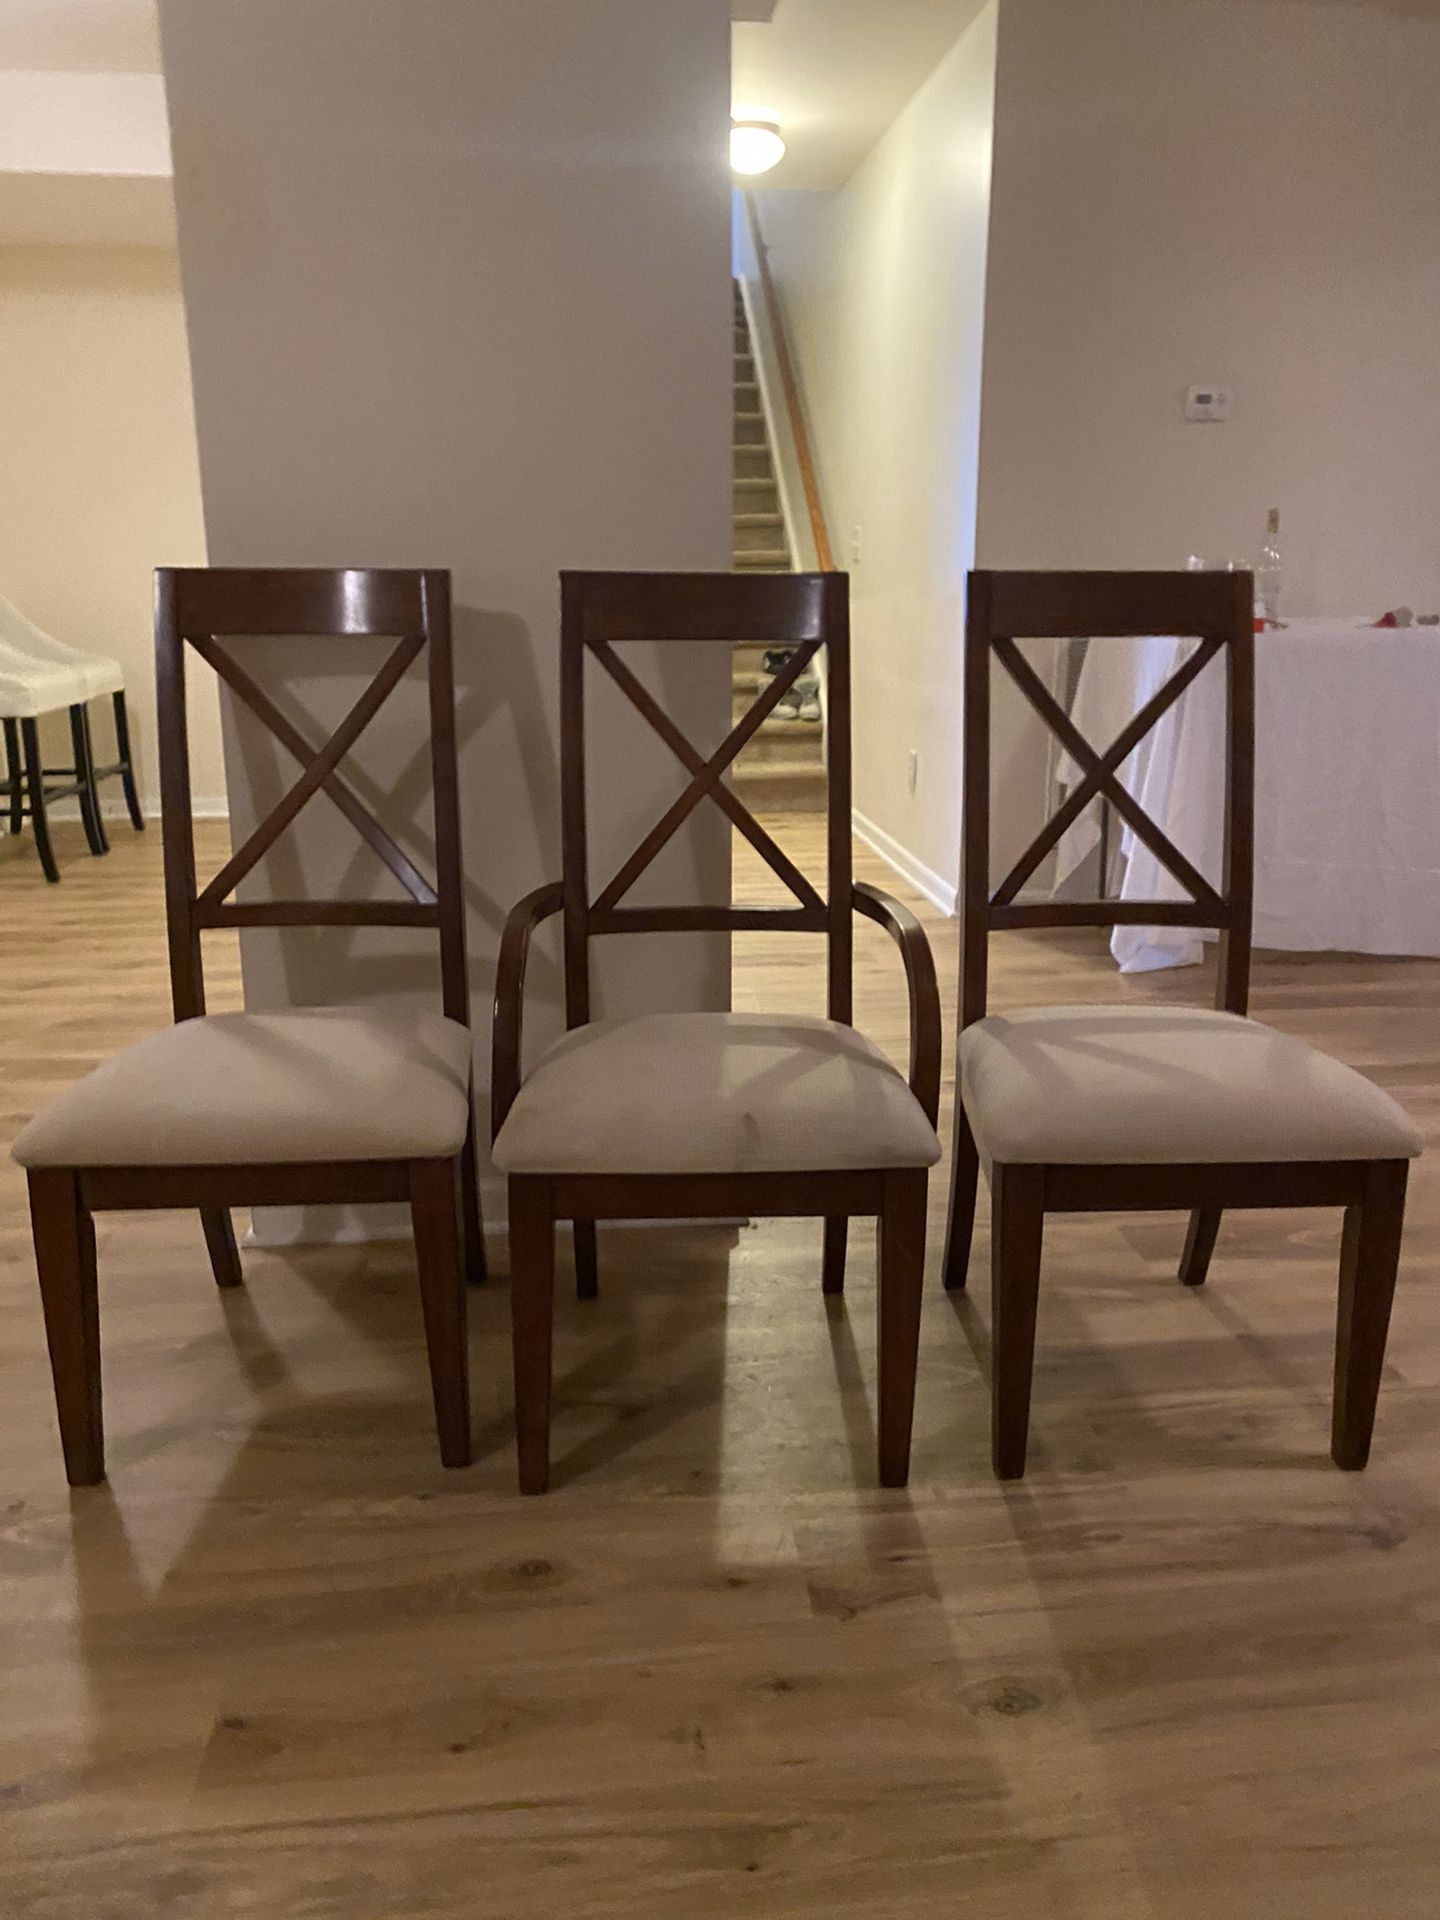 Table With Three Wooden Chairs